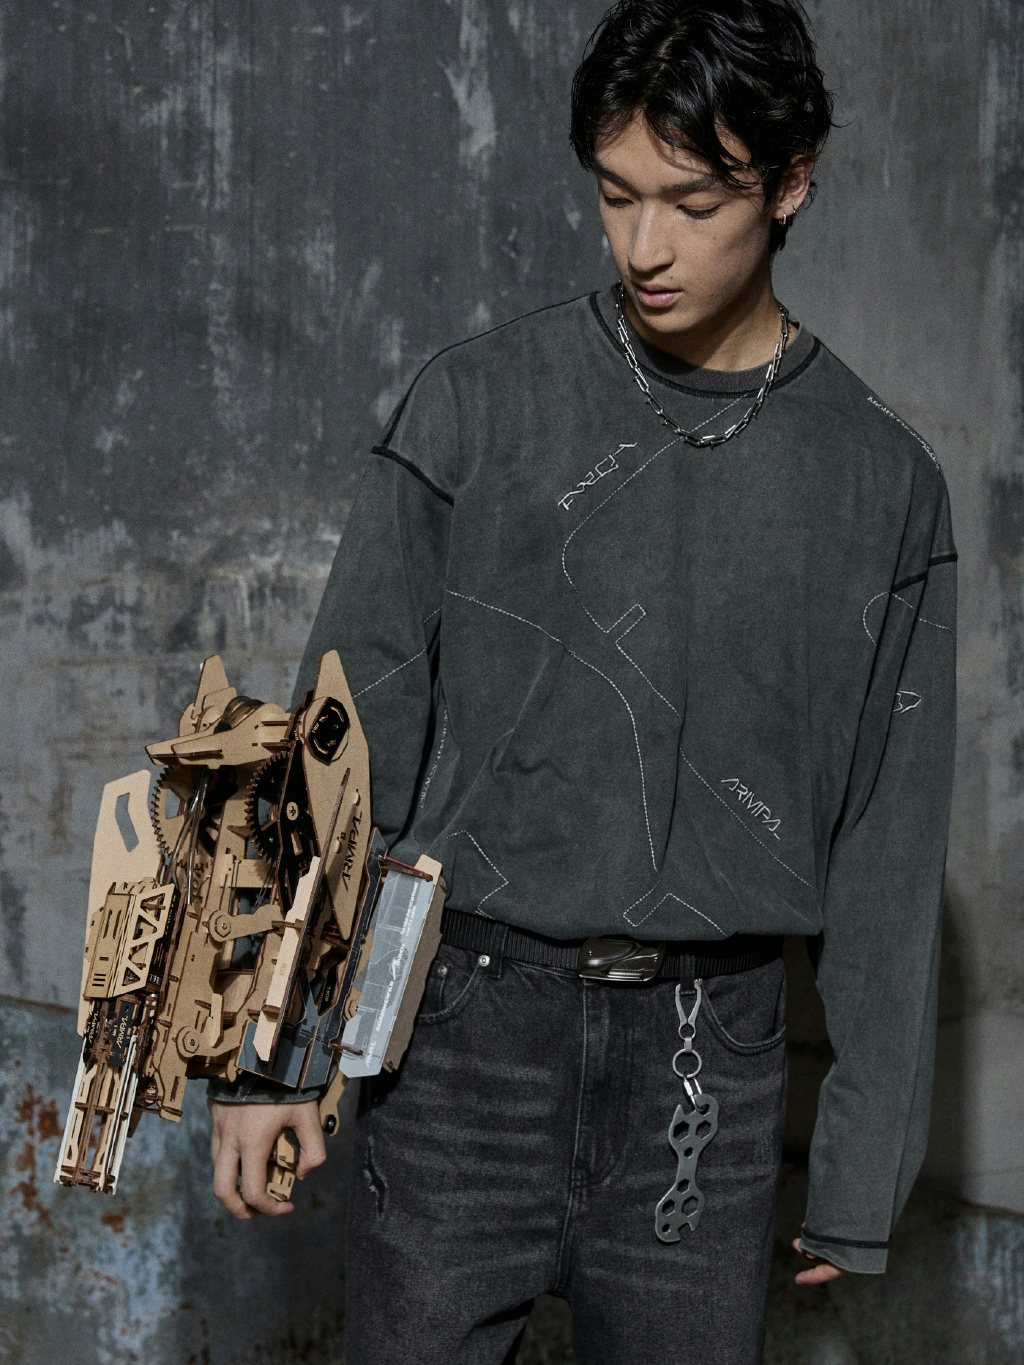 The "mechanical armour" of Ampal is reinterpreted by Arch by Roaringwild for a clothing collection. Photo: Arch by Roaringwild Weibo